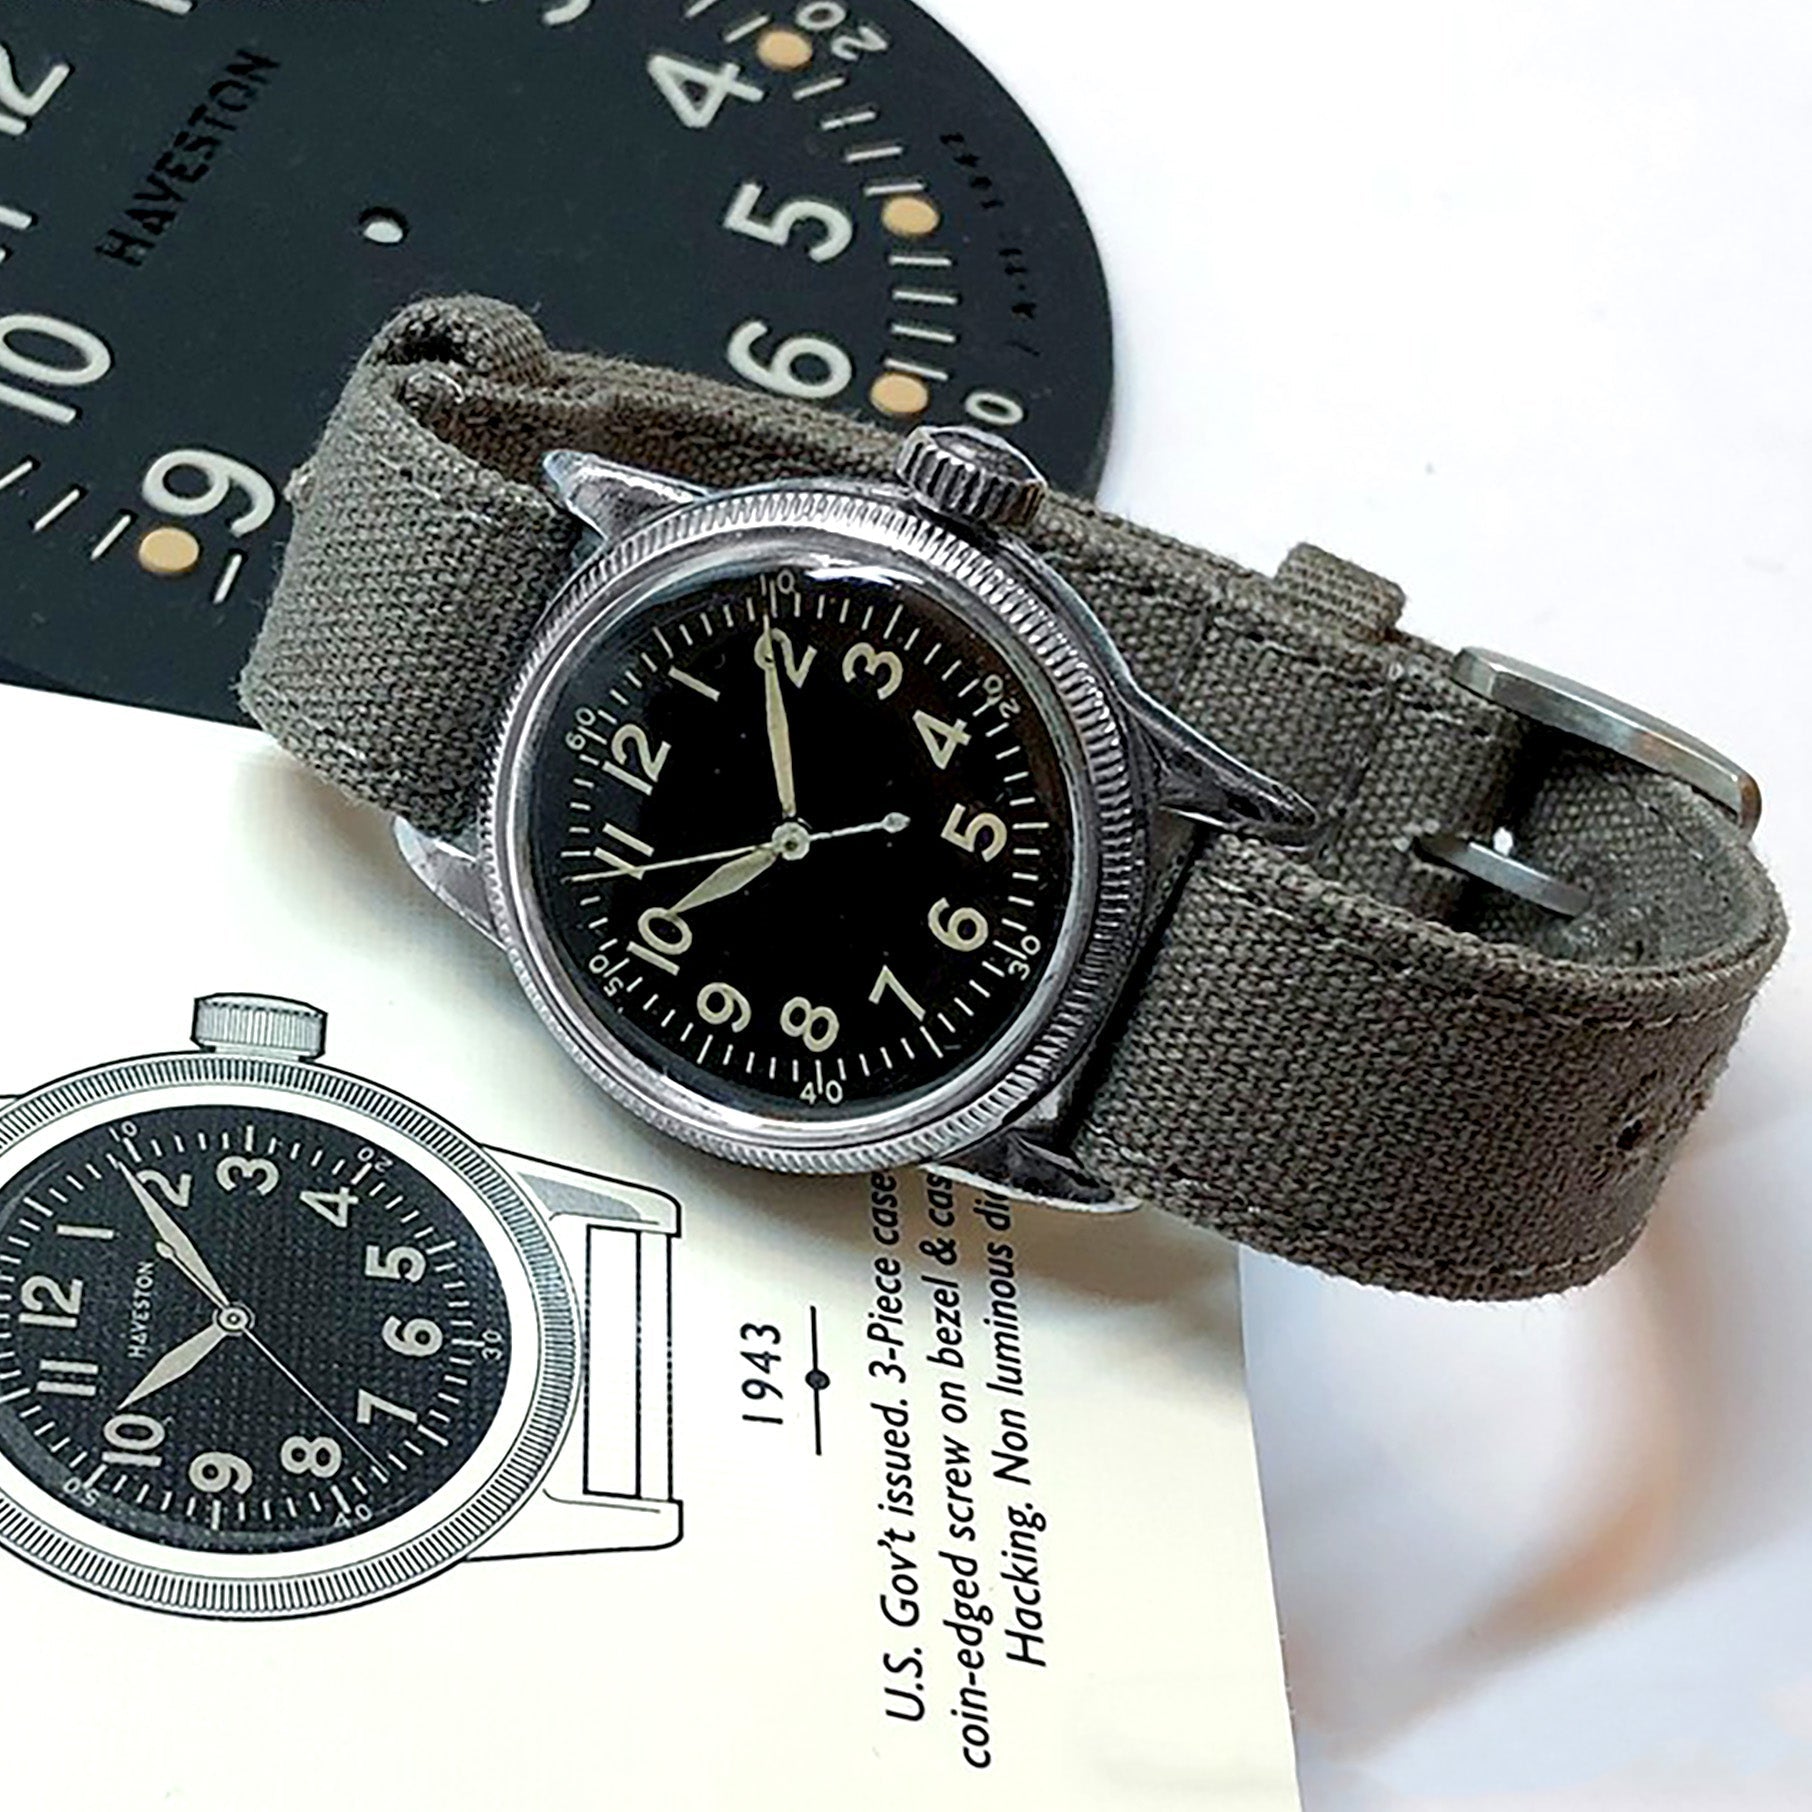 Watch Bands Tagged 16MM - Halifax Watch Company